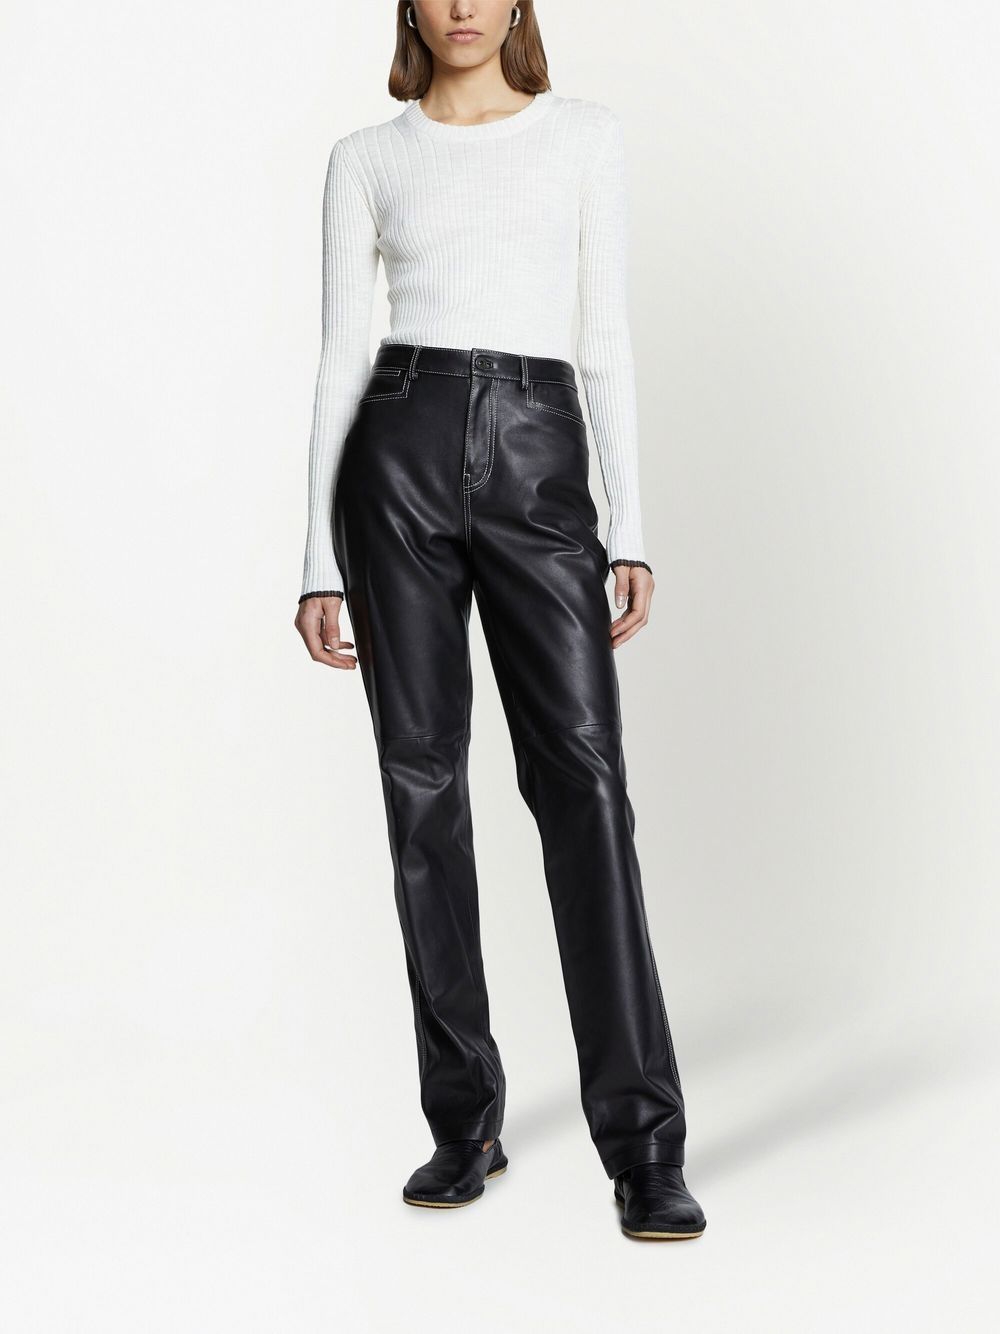 Proenza Schouler White Label Straight Leather Trousers - Farfetch